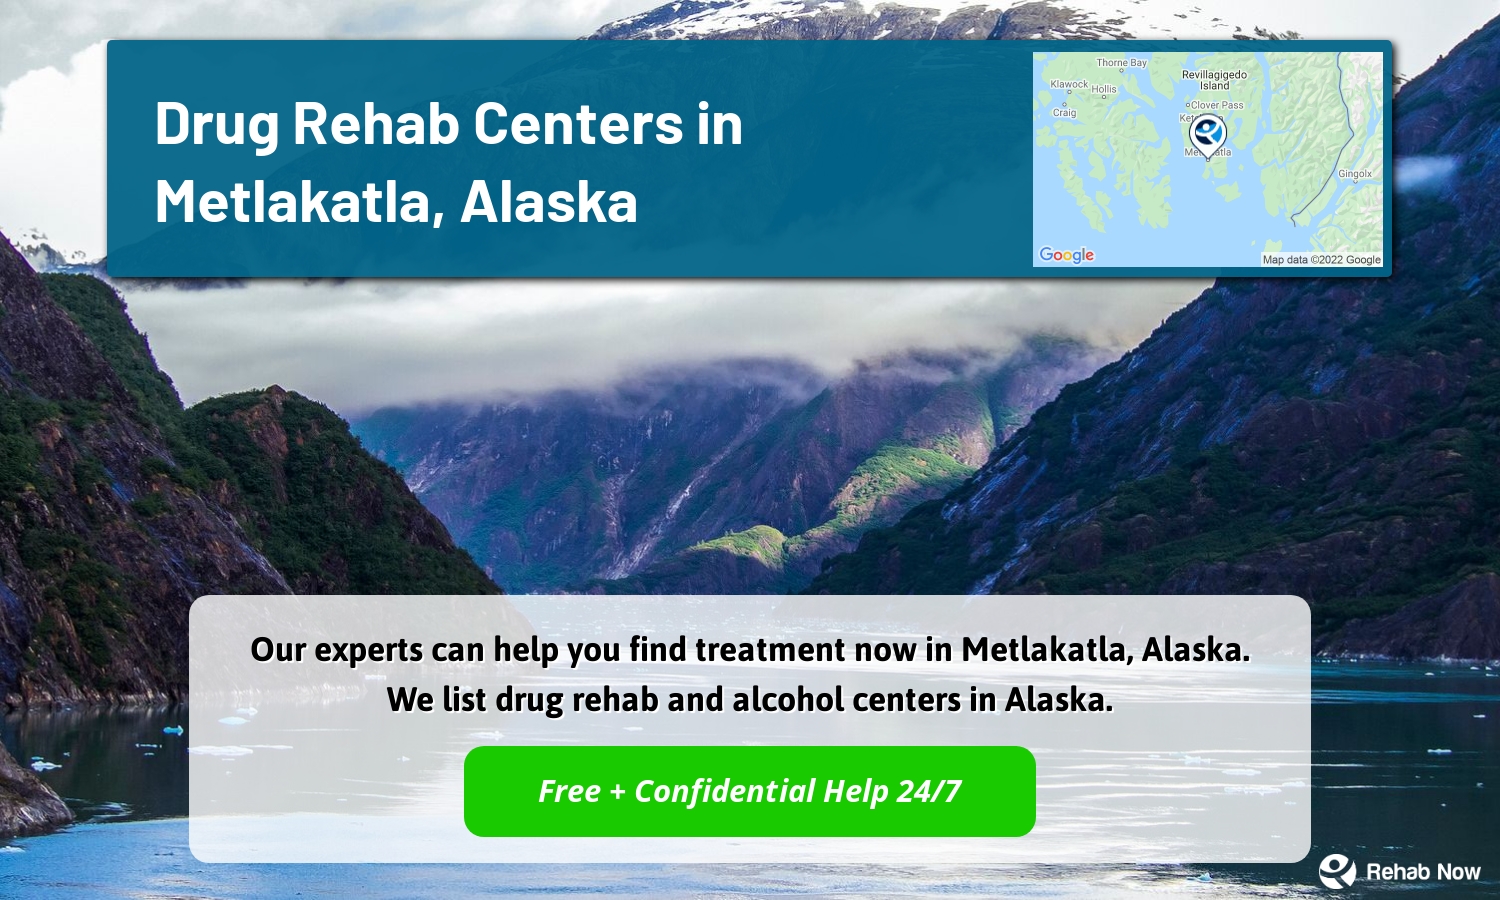 Our experts can help you find treatment now in Metlakatla, Alaska. We list drug rehab and alcohol centers in Alaska.